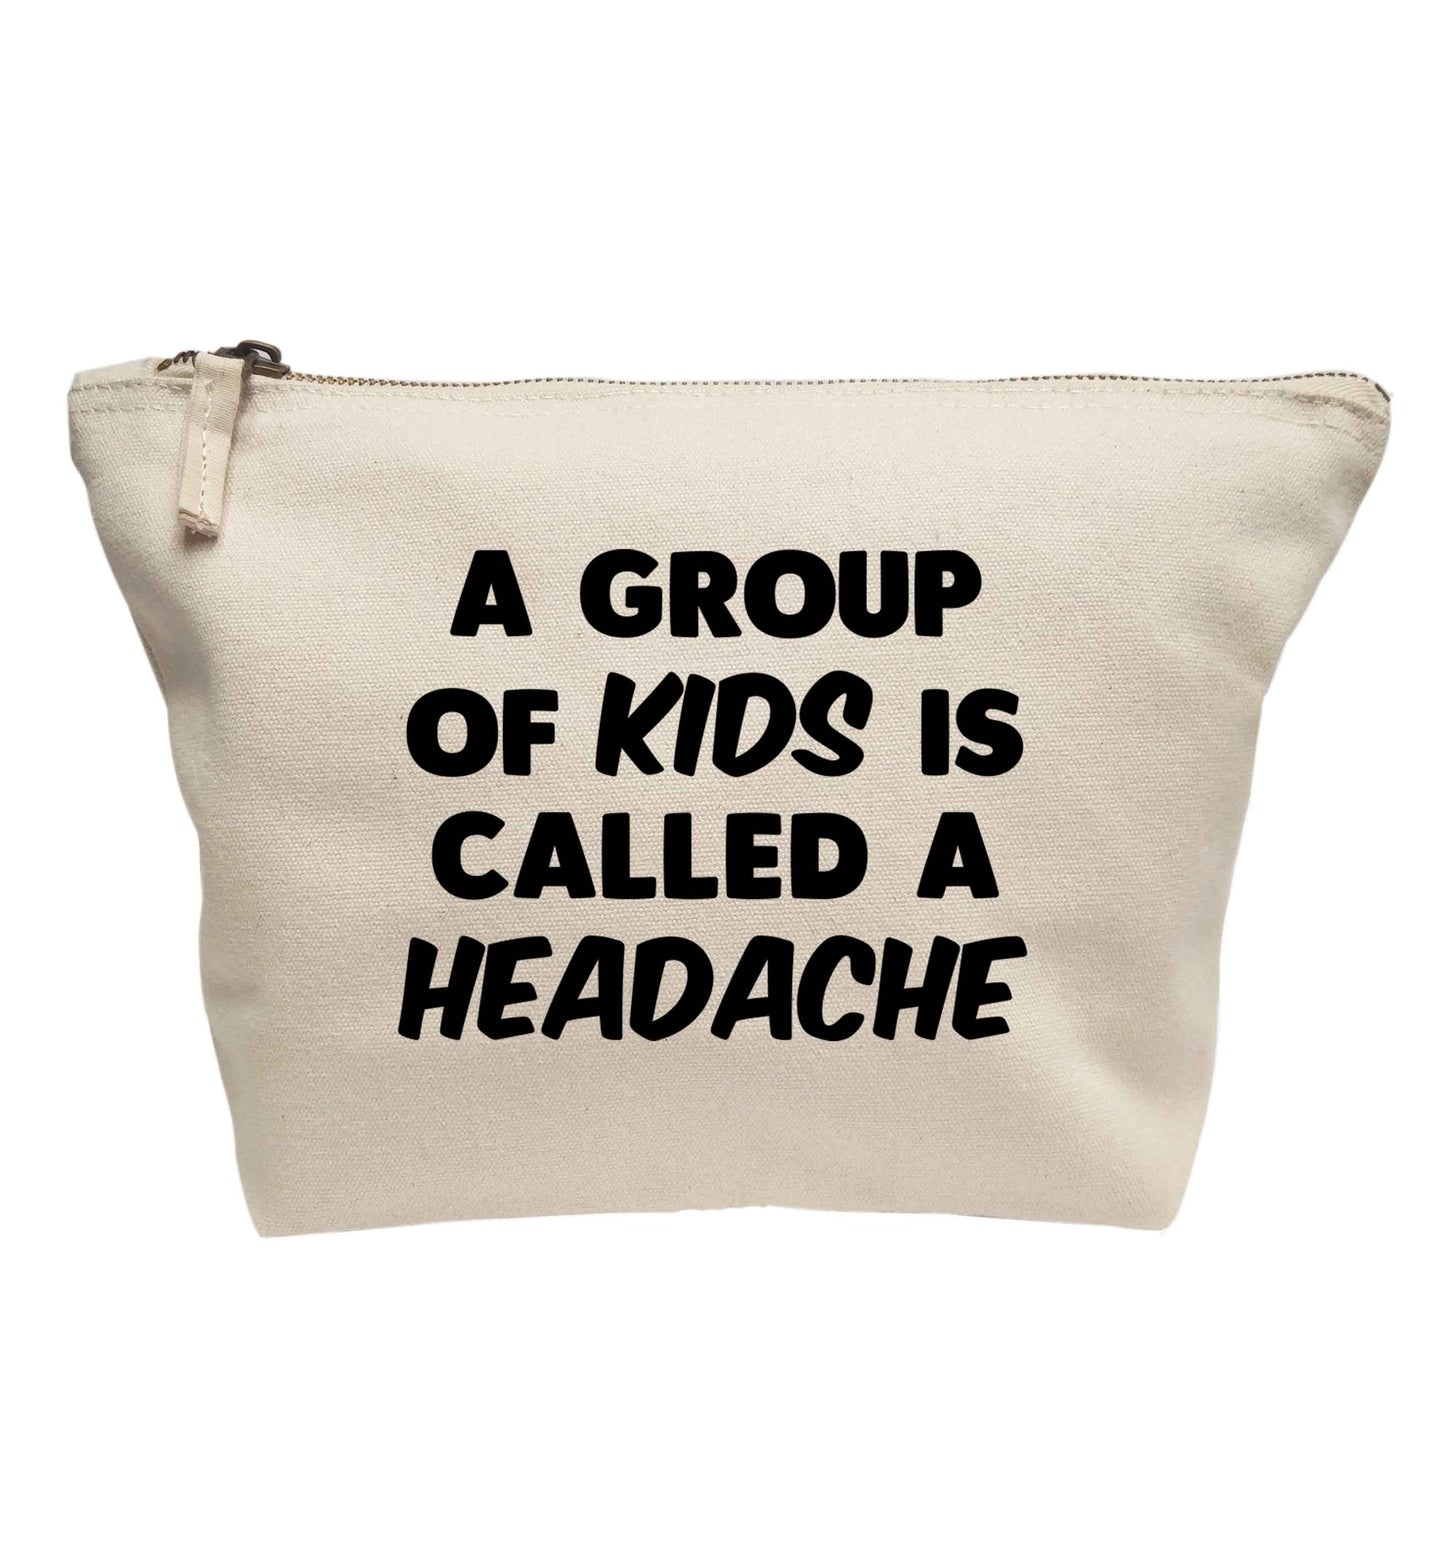 A group of kids is called a headache | makeup / wash bag